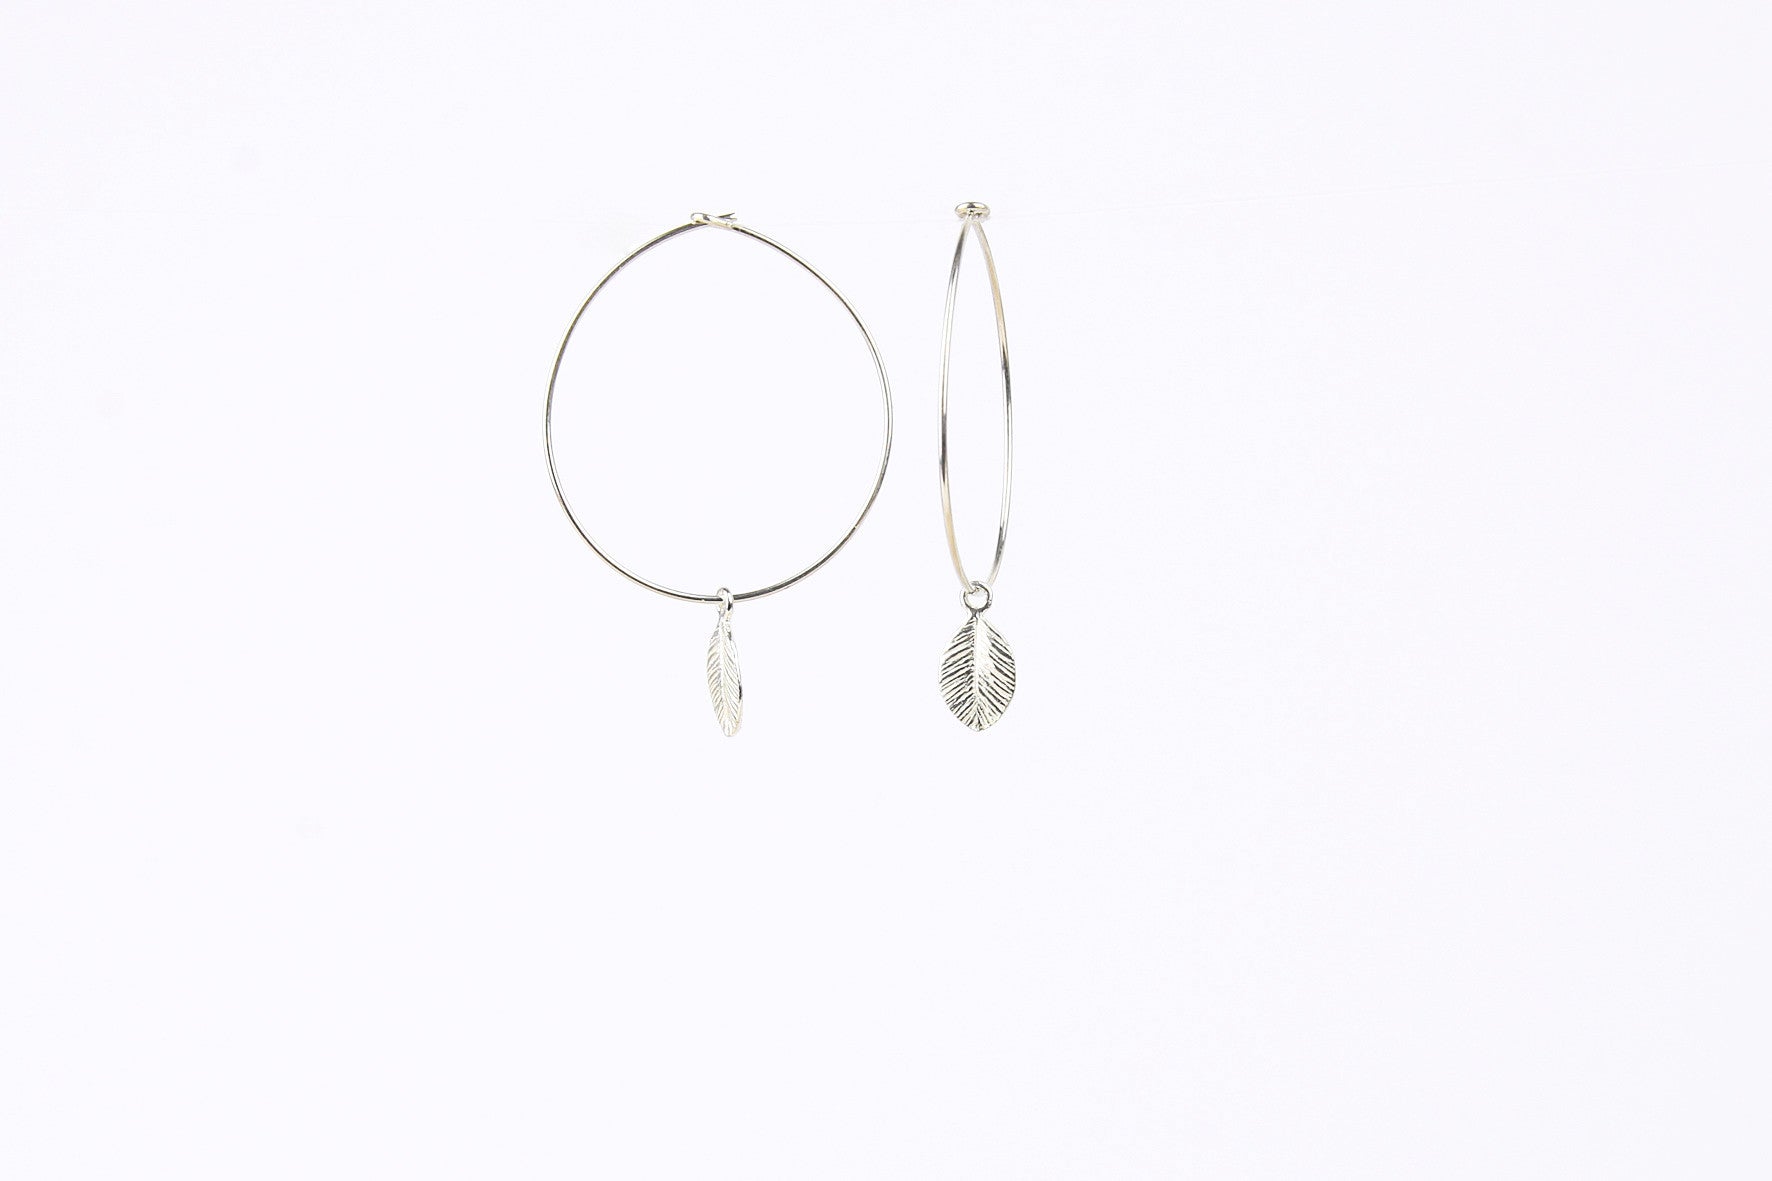 jewelberry ohrringe earrings tiny leaf hoops sterling silver fine jewelry handmade with love fairtrade